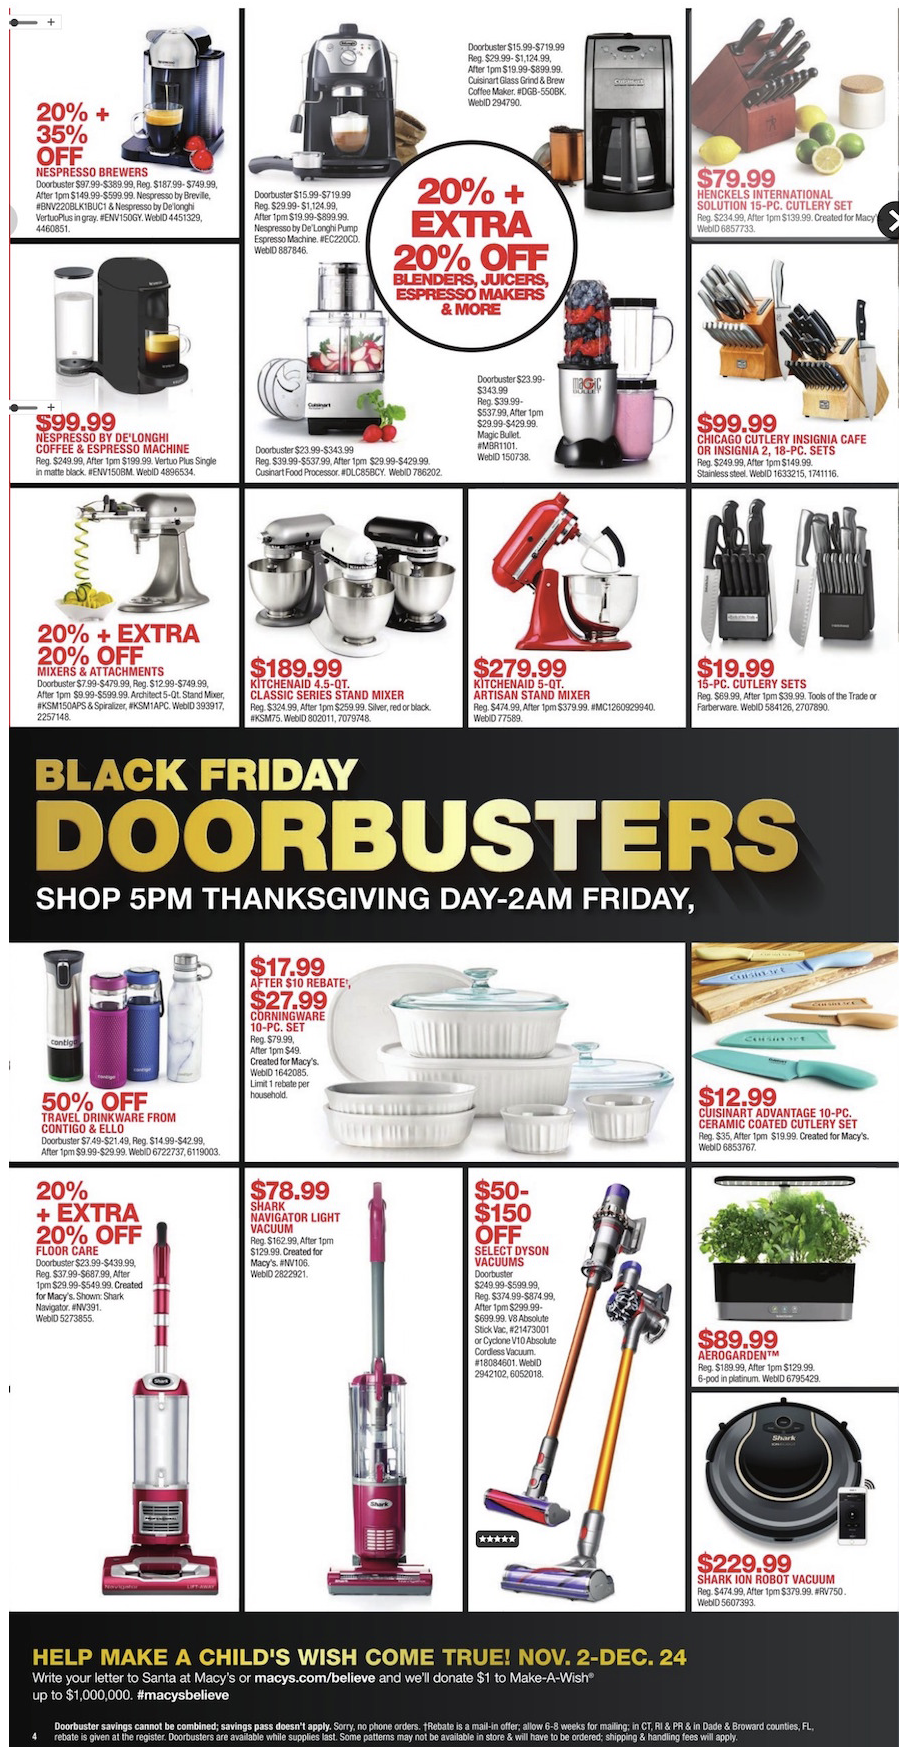 https://9to5toys.com/wp-content/uploads/sites/5/2018/11/Macys-Black-Friday-ad-9.png